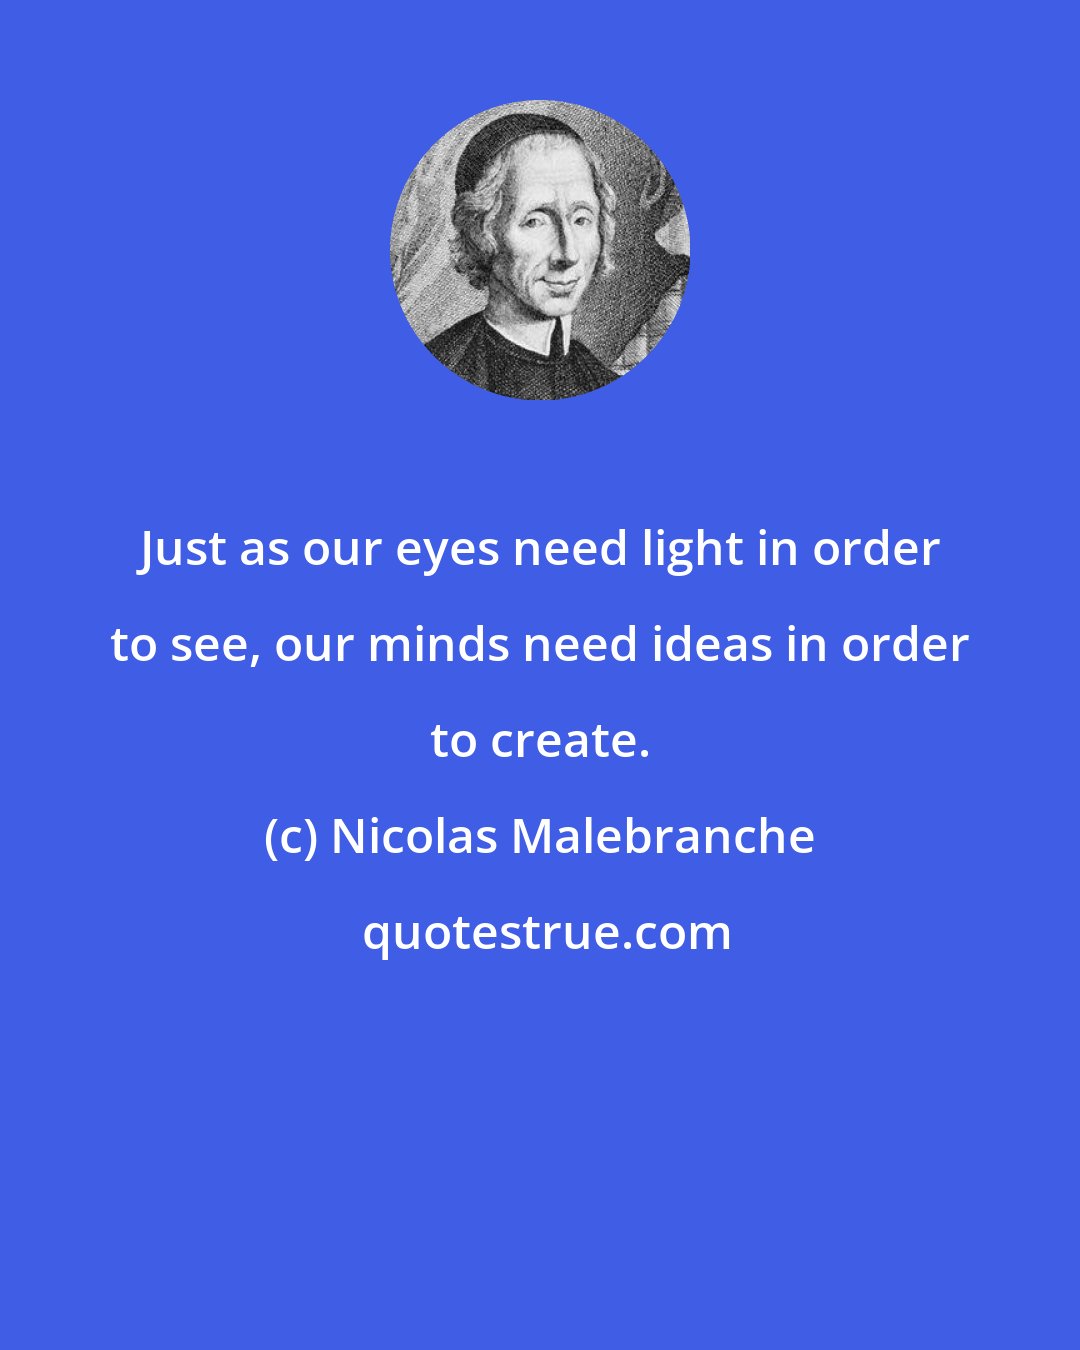 Nicolas Malebranche: Just as our eyes need light in order to see, our minds need ideas in order to create.